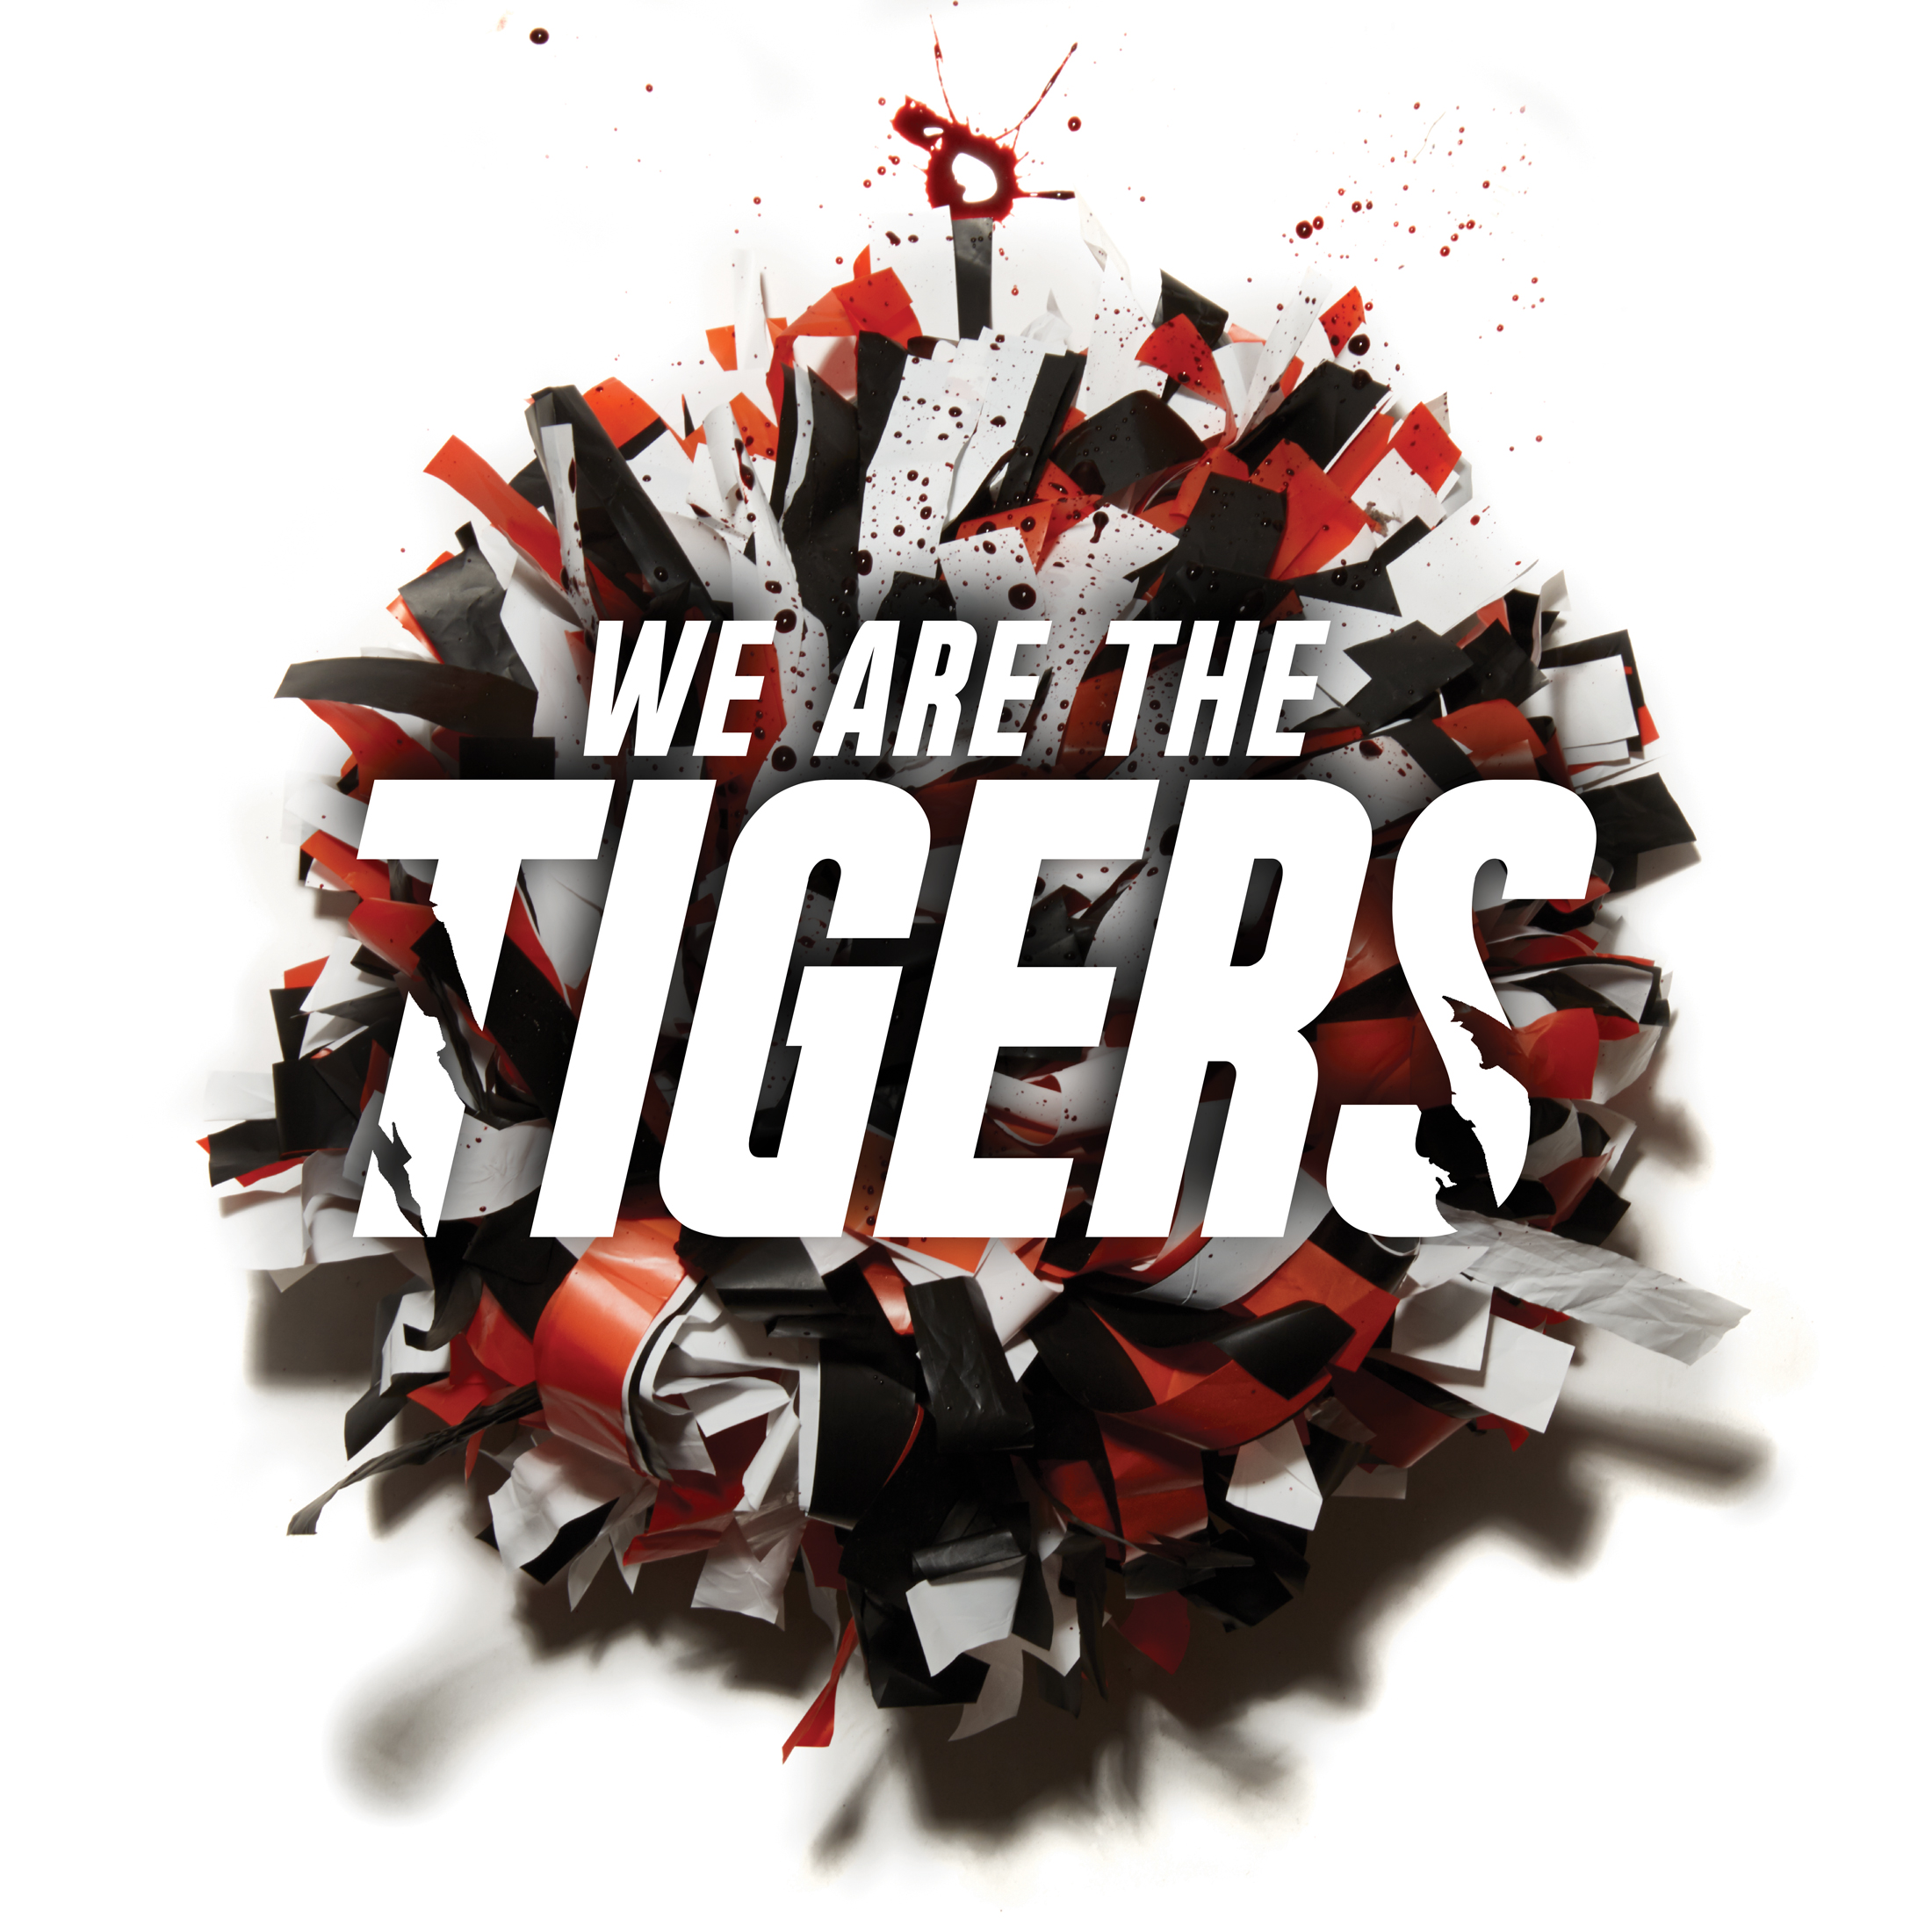  Musical Logo and Visual Identity (Genre: Dark Comedy)  2015  " We Are The Tigers "&nbsp;  Photographer:  Zack DeZon  